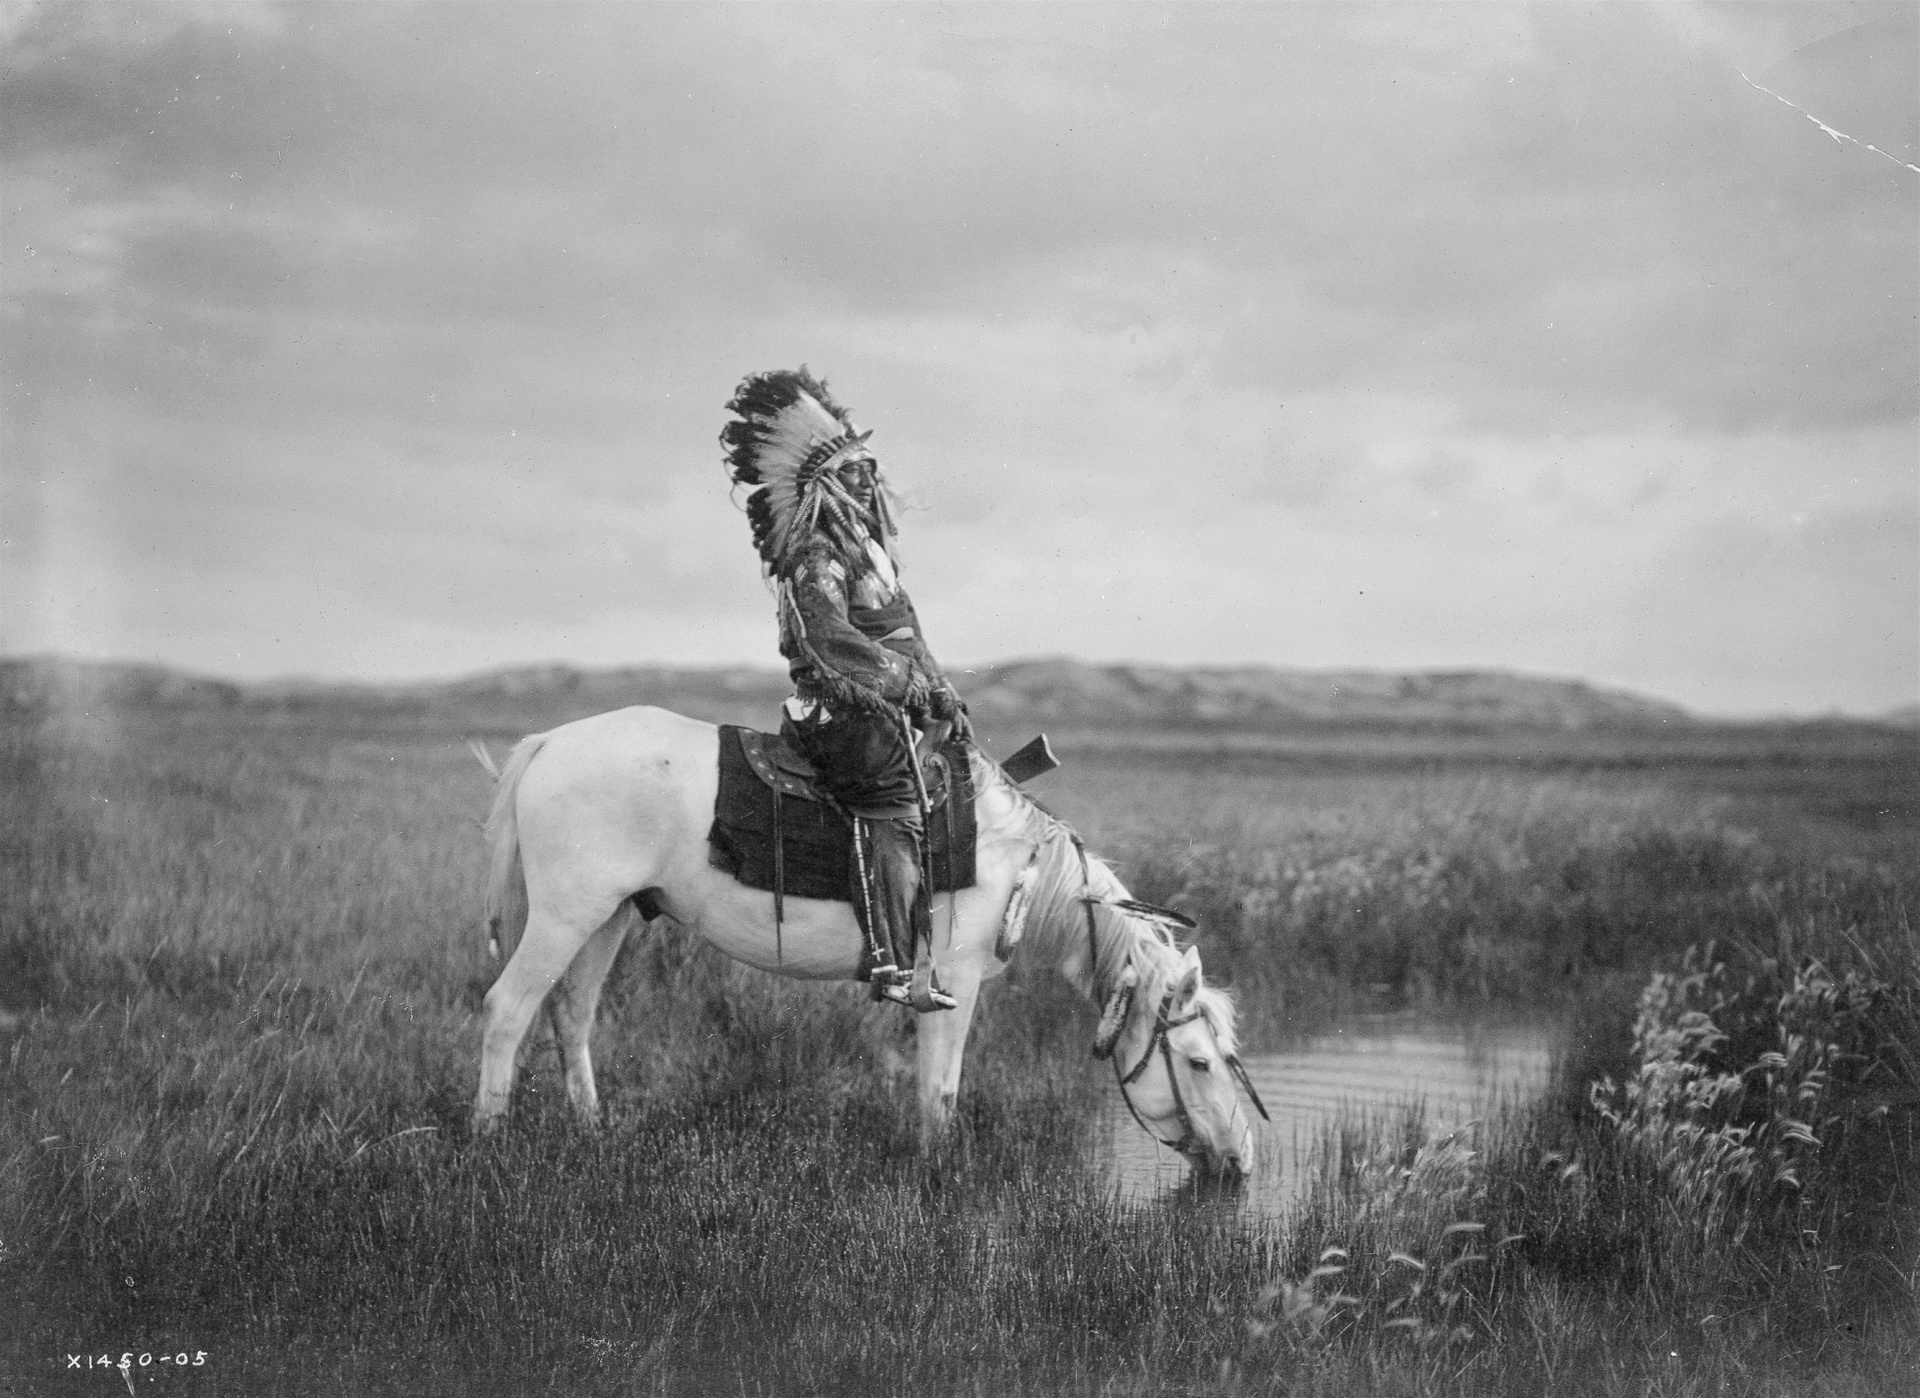 Historical Indian American Chief on his horse - beautiful vintage digital photography image. A view into the culture and traditions of Indo-Americans